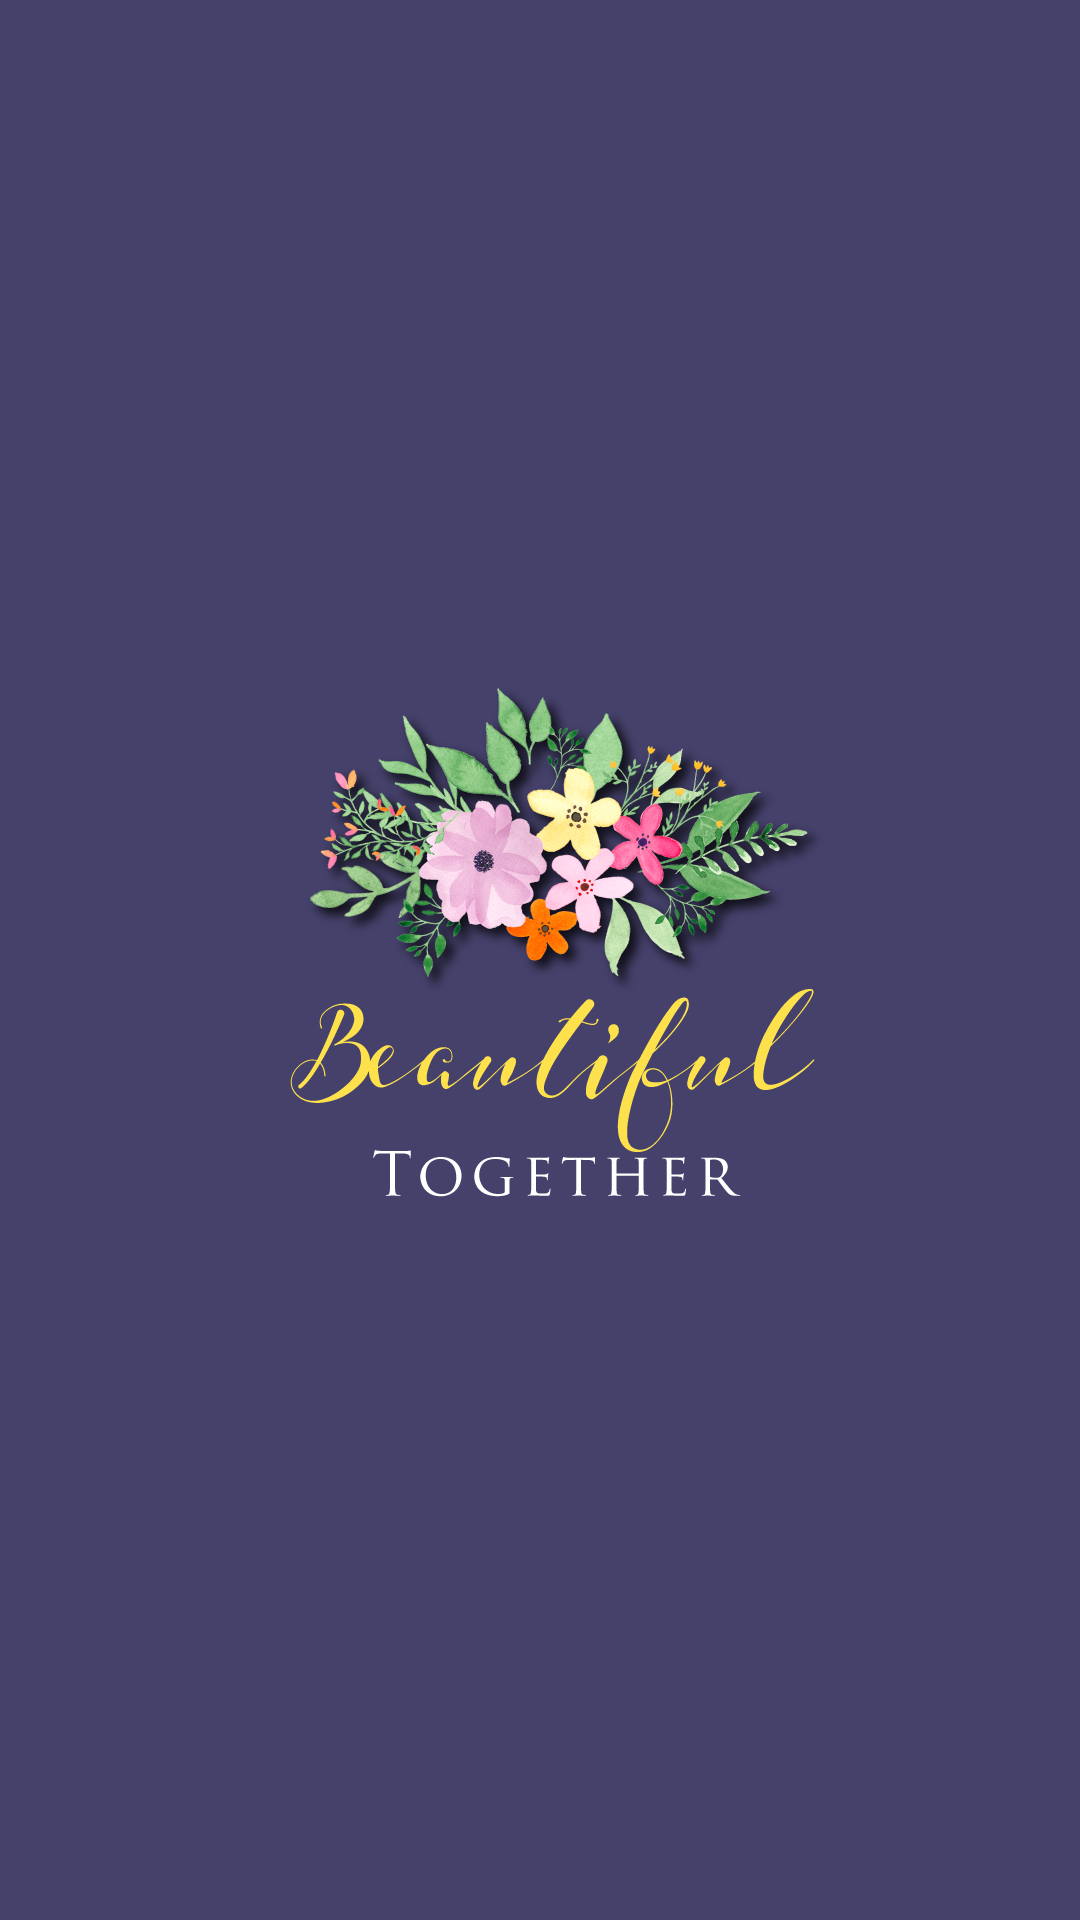 Beautiful Together : Free printable poster